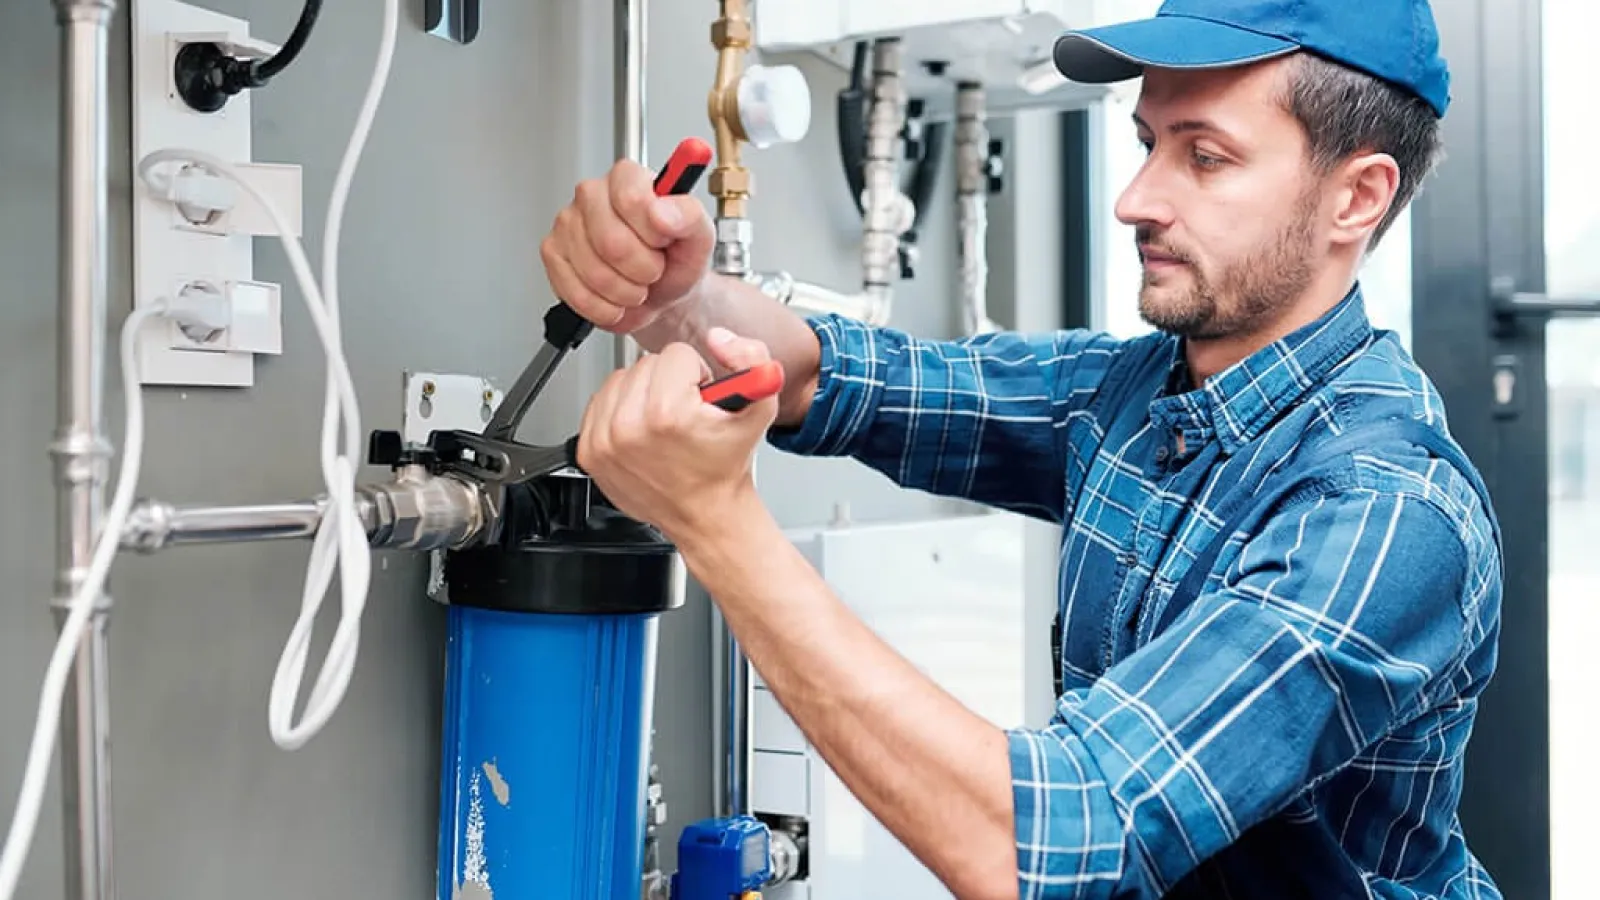 Home Water Filtration System Benefits | 9 Reasons to Consider for Your Family